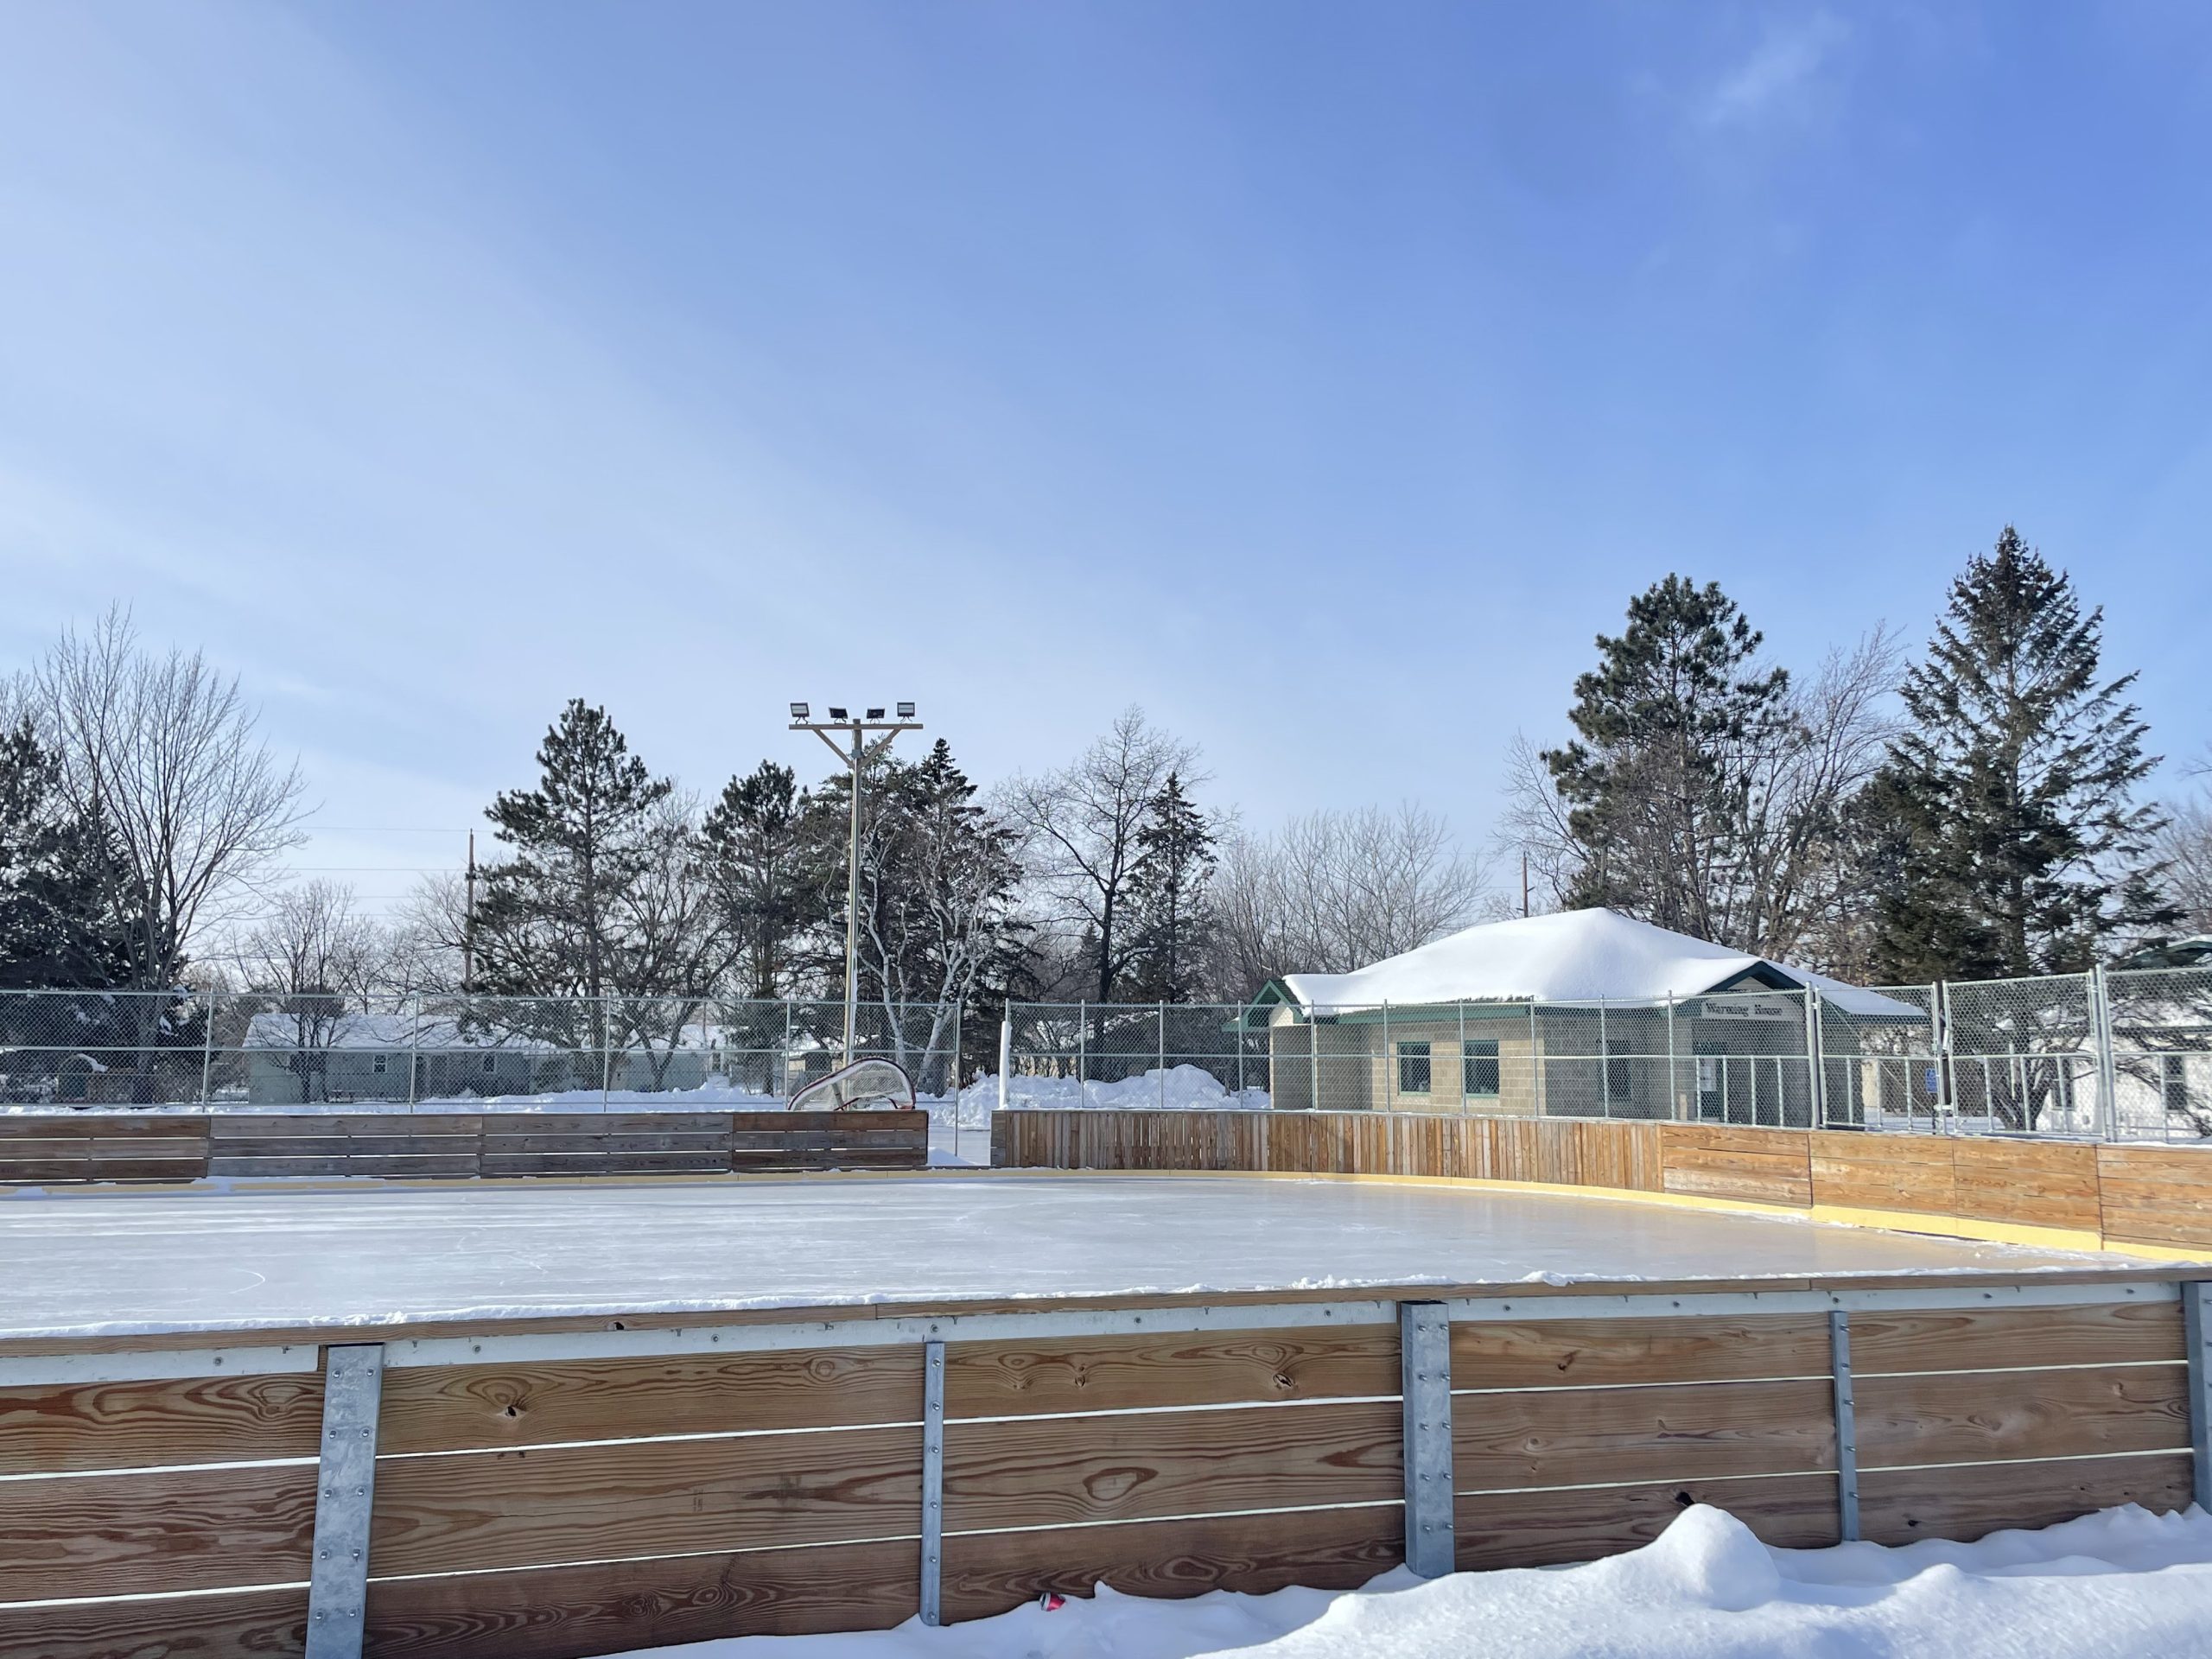 A photo of the City Park rink in Bemidji